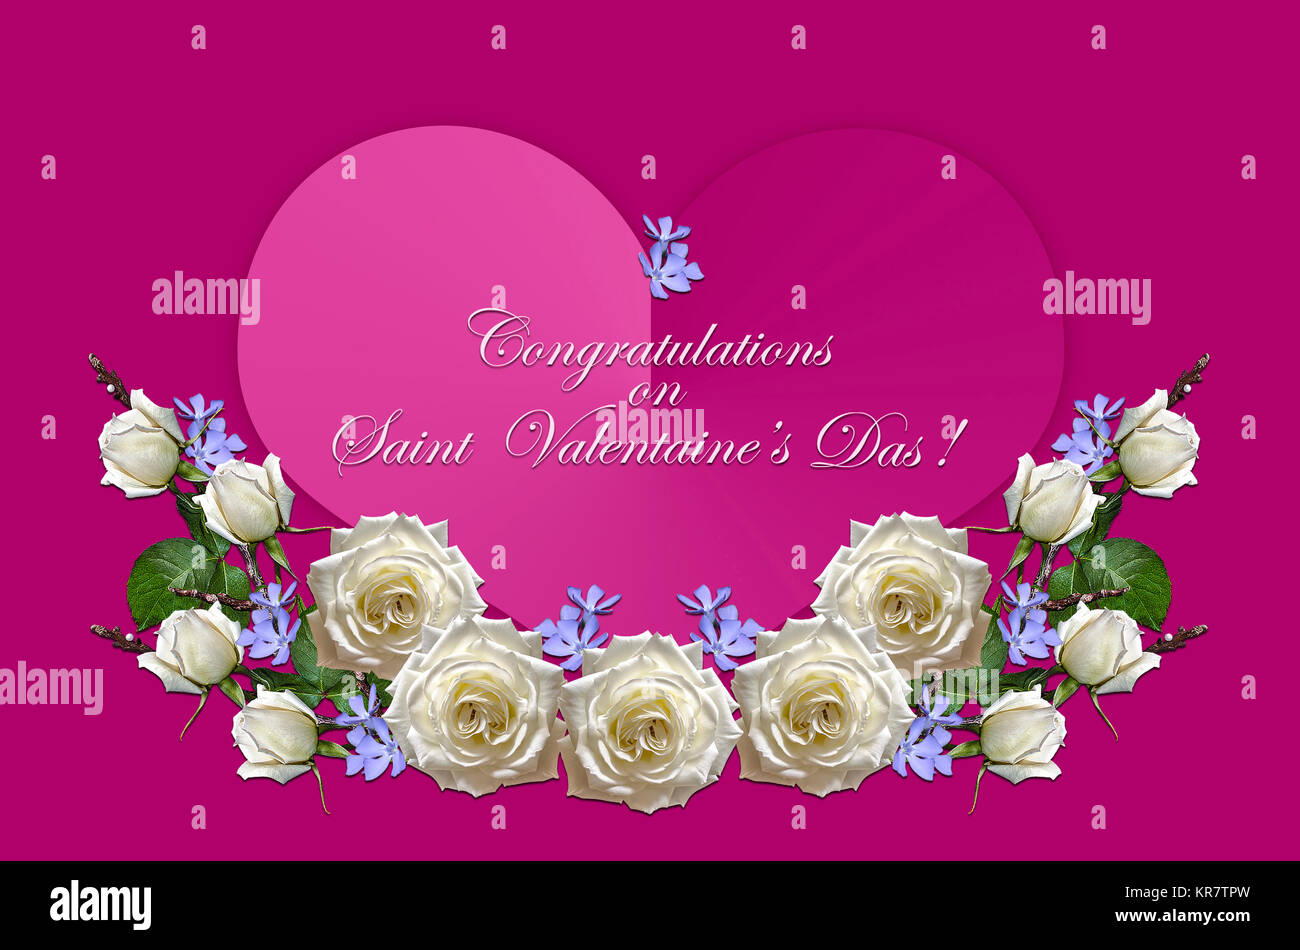 Garland of white roses with buds and purple periwinkle with pink hearts on  colors fuchsia background Stock Photo - Alamy